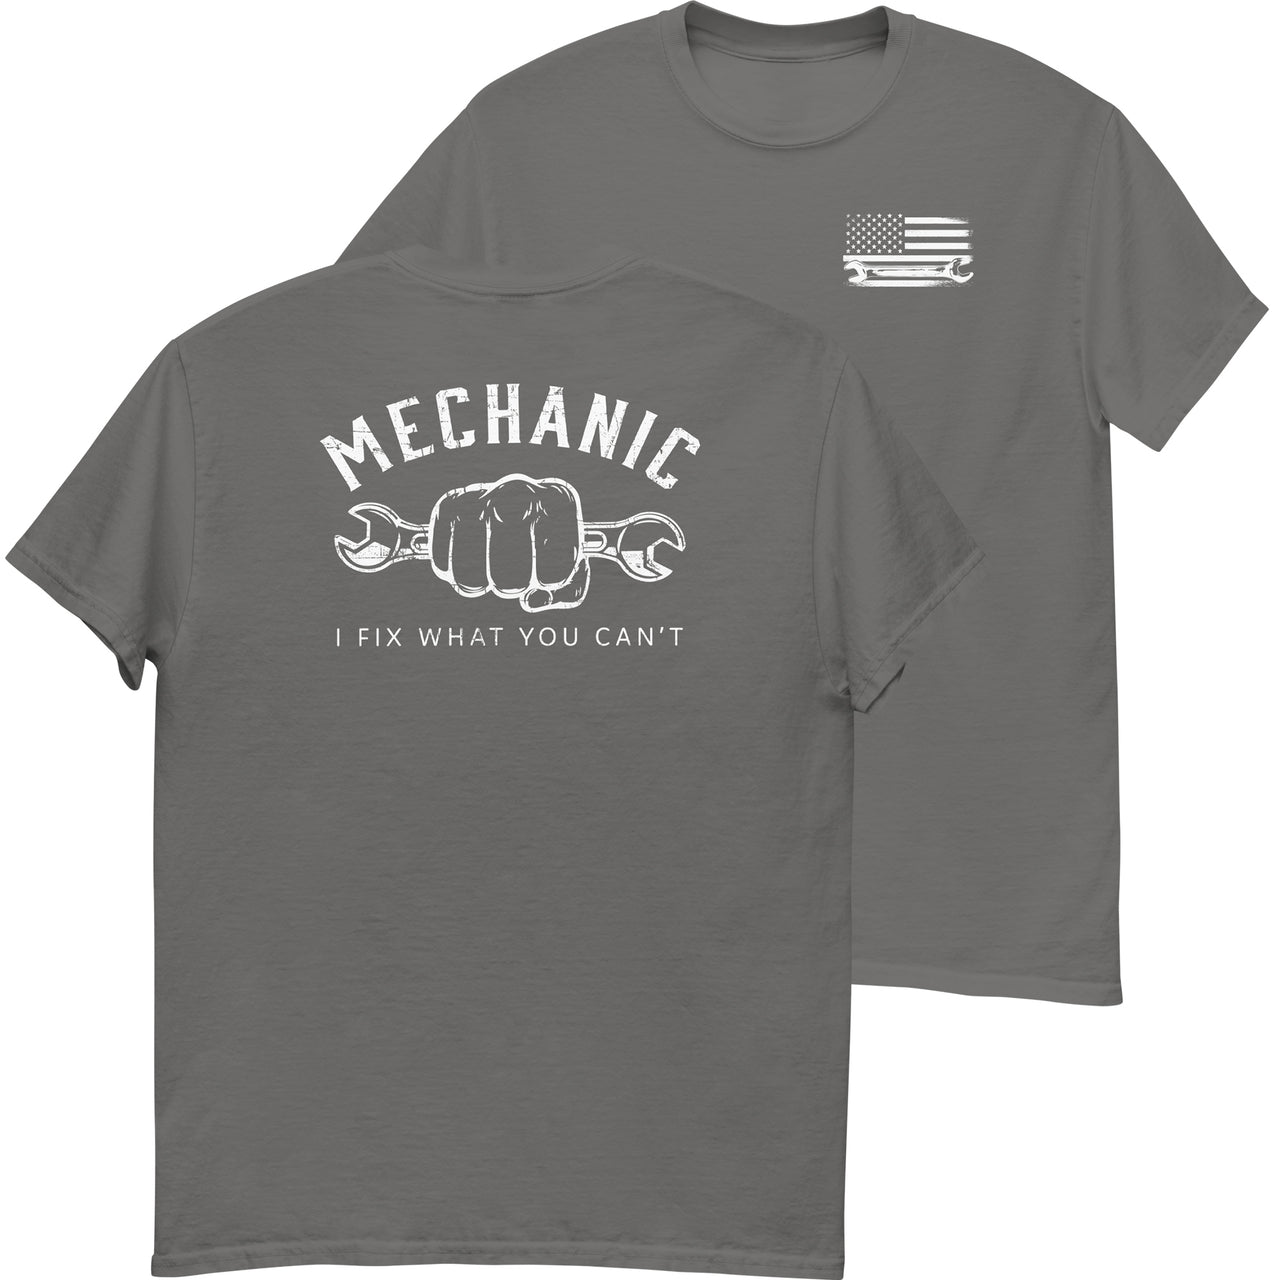 Mechanic T-Shirt - I Fix What You Cant in charcoal